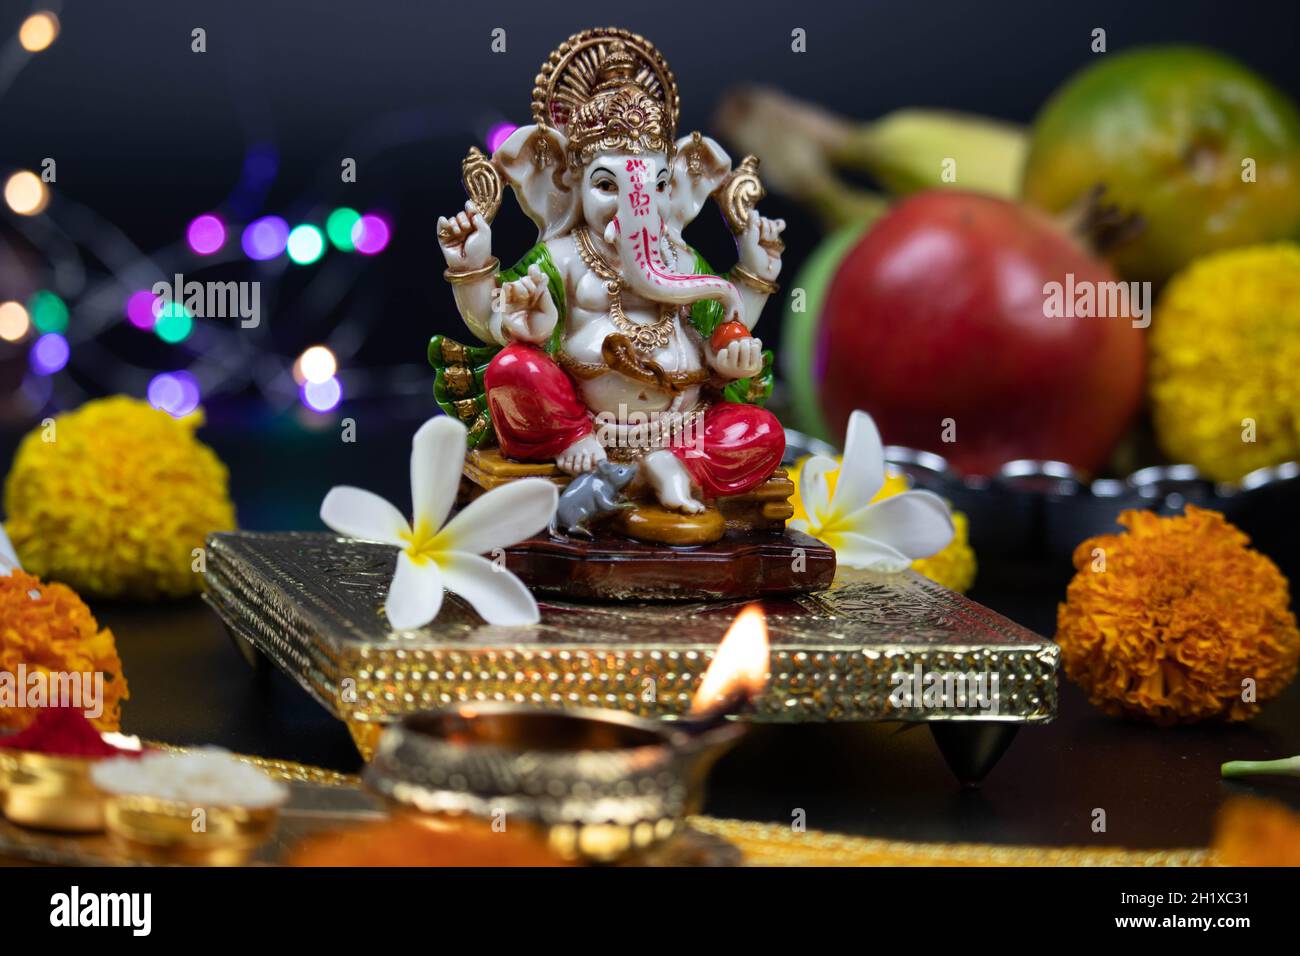 Photos: Your best selfies with the beloved Ganapati Bappa